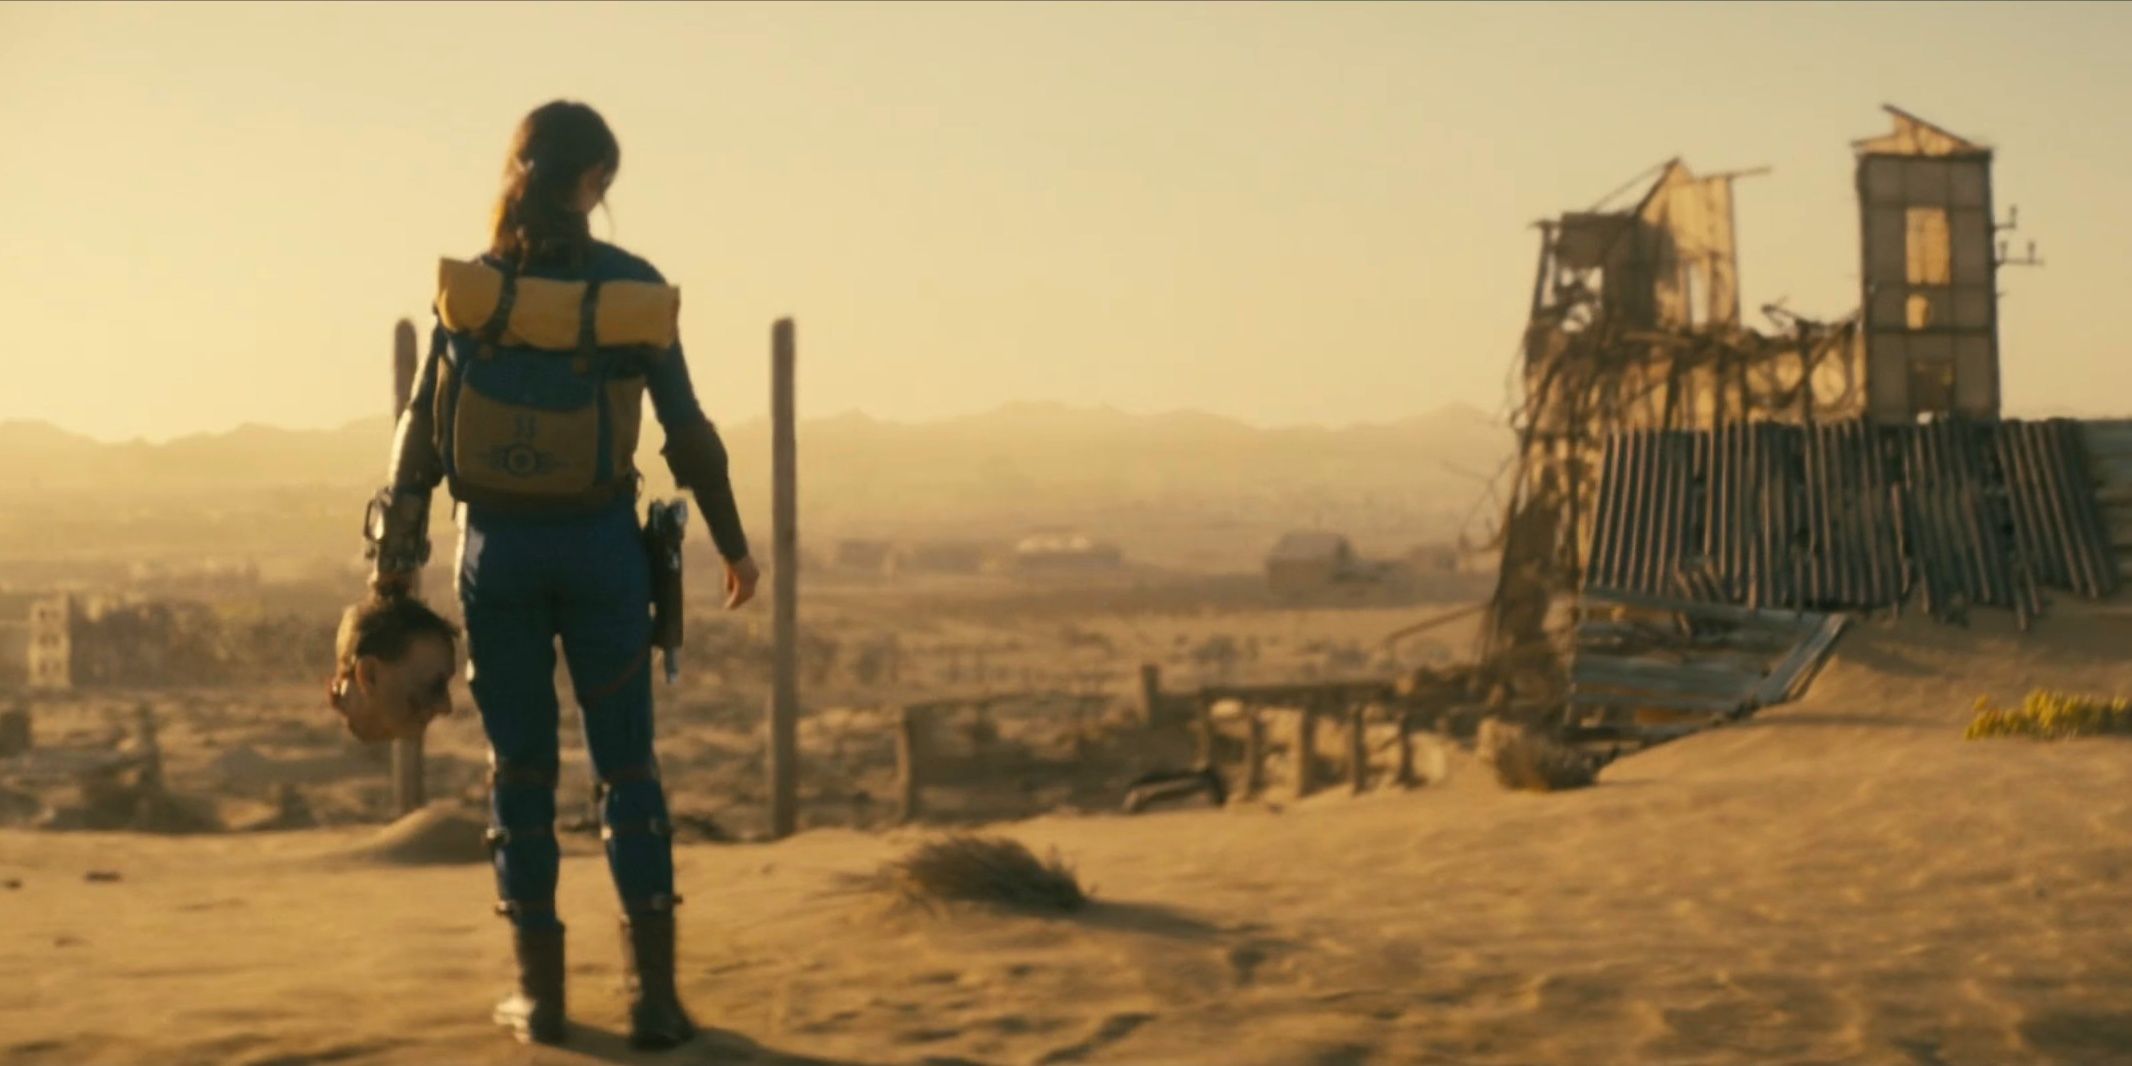 Lucy carrying a head looking out on wasteland in Fallout